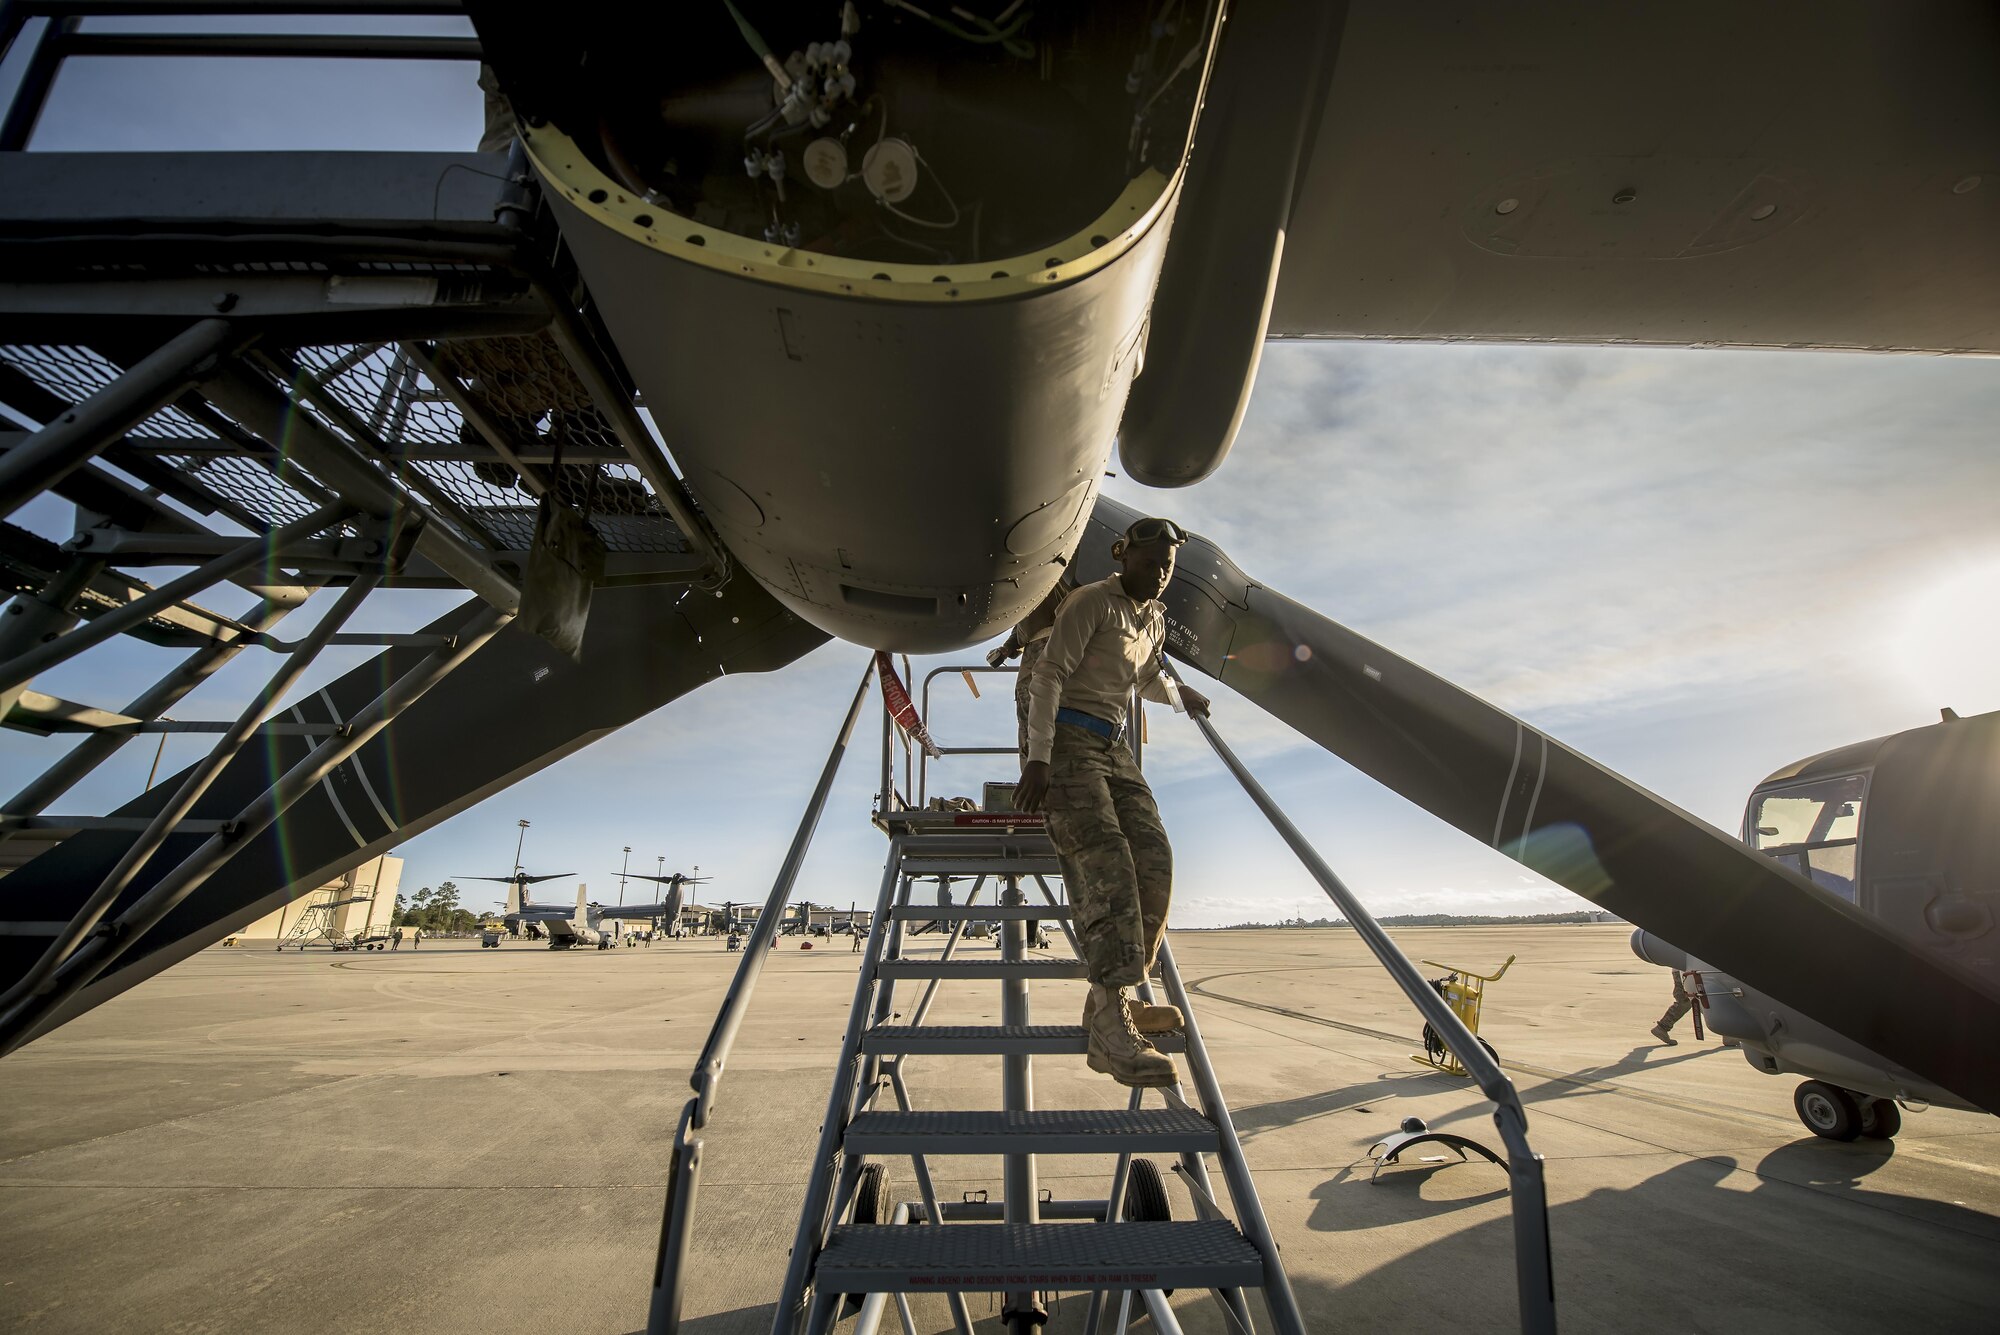 Staff Sgt. Roland Garrett, a crew chief with the 801st Special Operations Aircraft Maintenance Squadron, walks down stairs during routine maintenance of a CV-22 Osprey tiltrotor aircraft at Hurlburt Field, Fla., Jan. 9, 2017. The 801st SOAMXS mission is to perform equipment maintenance in support of global special operations missions. (U.S. Air Force photo by Staff Sgt. Christopher Callaway)